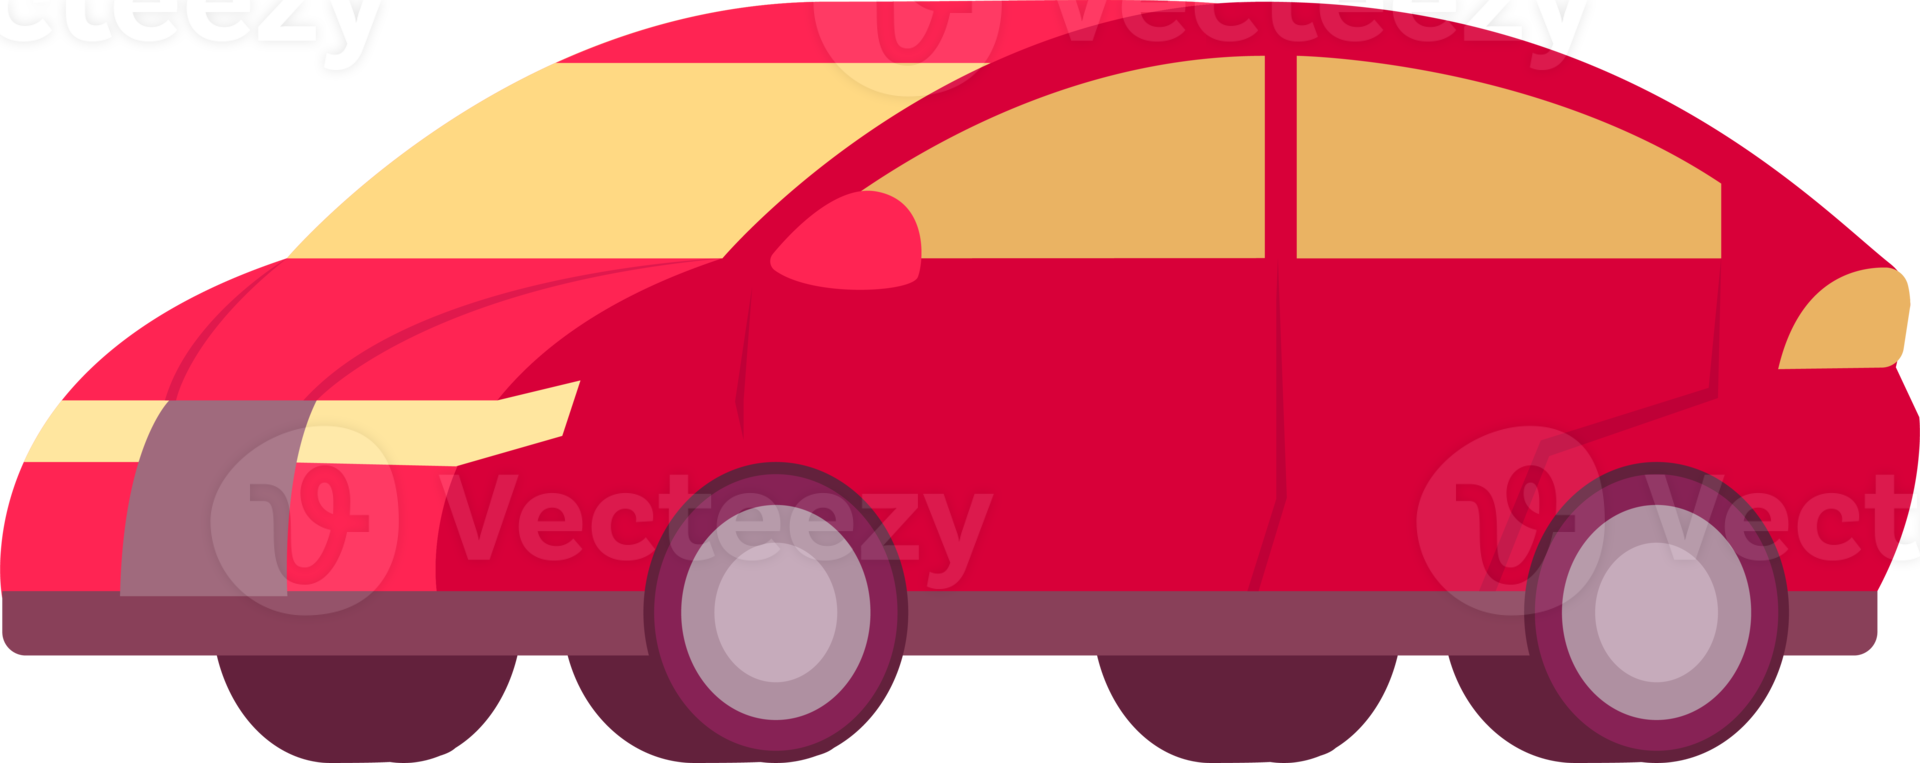 Colorful car illustration. Flat style automobile. Profile projection, side view. PNG with transparent background.